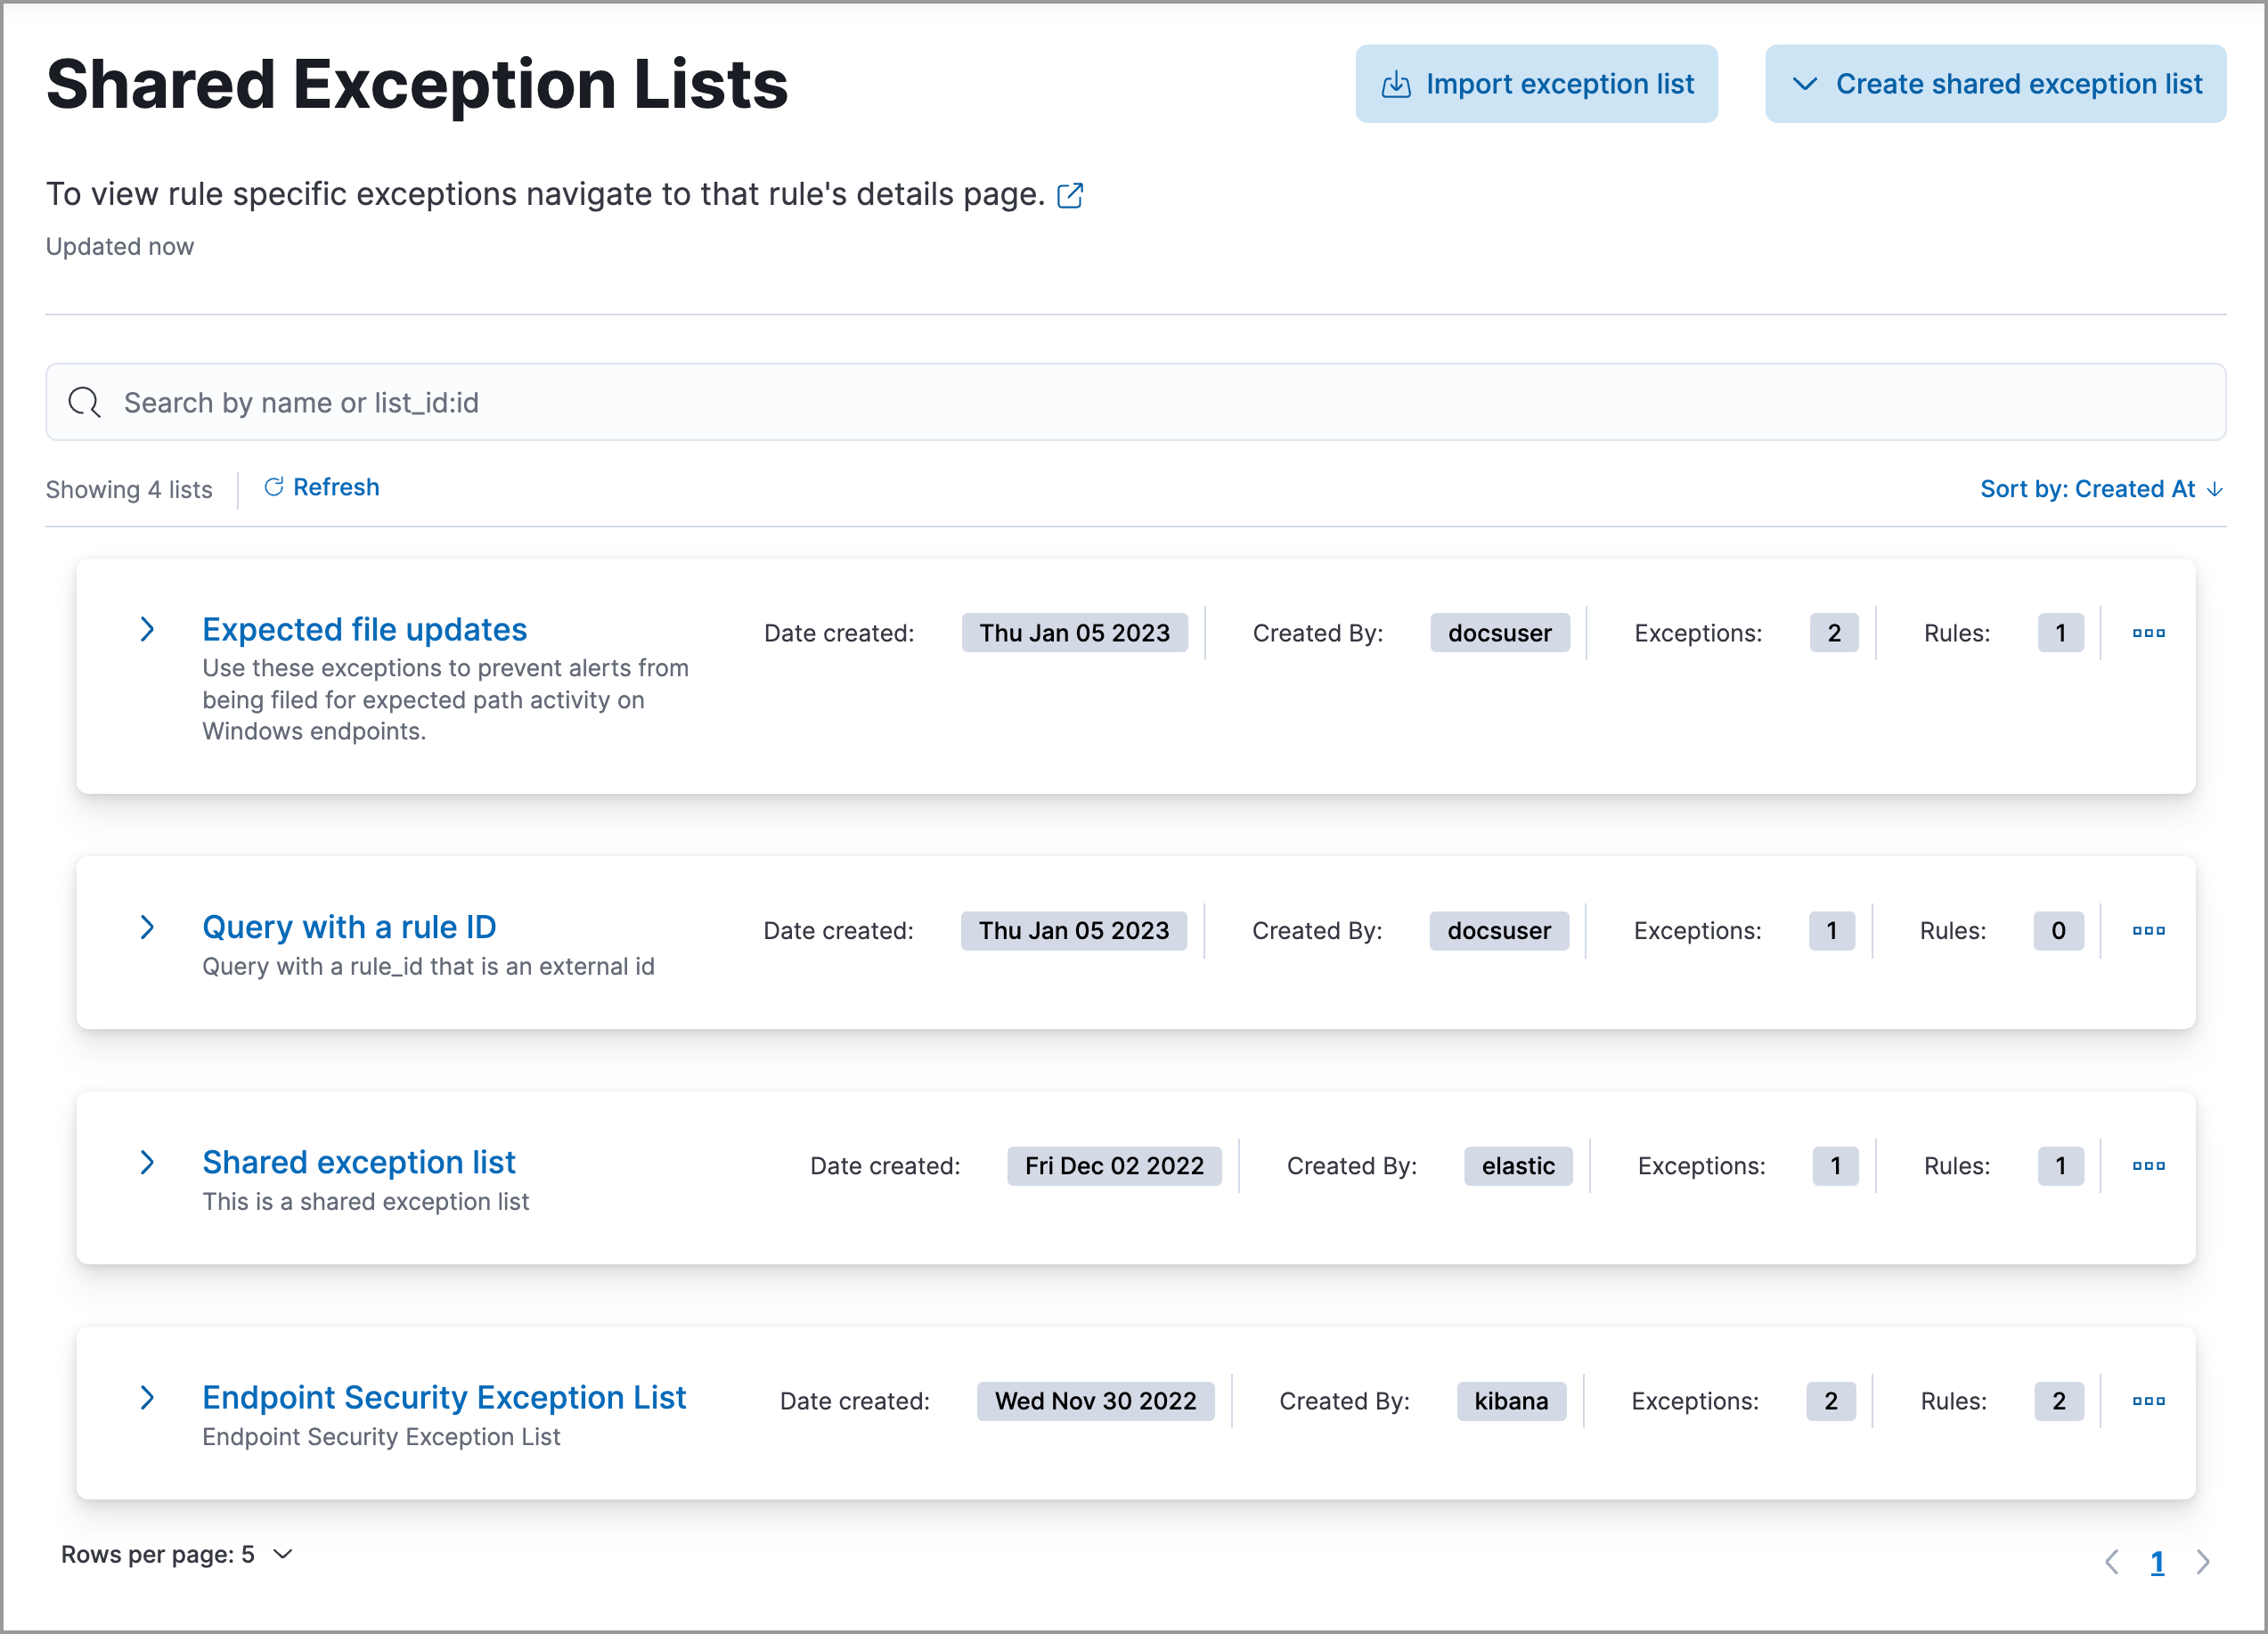 Shared Exception Lists page